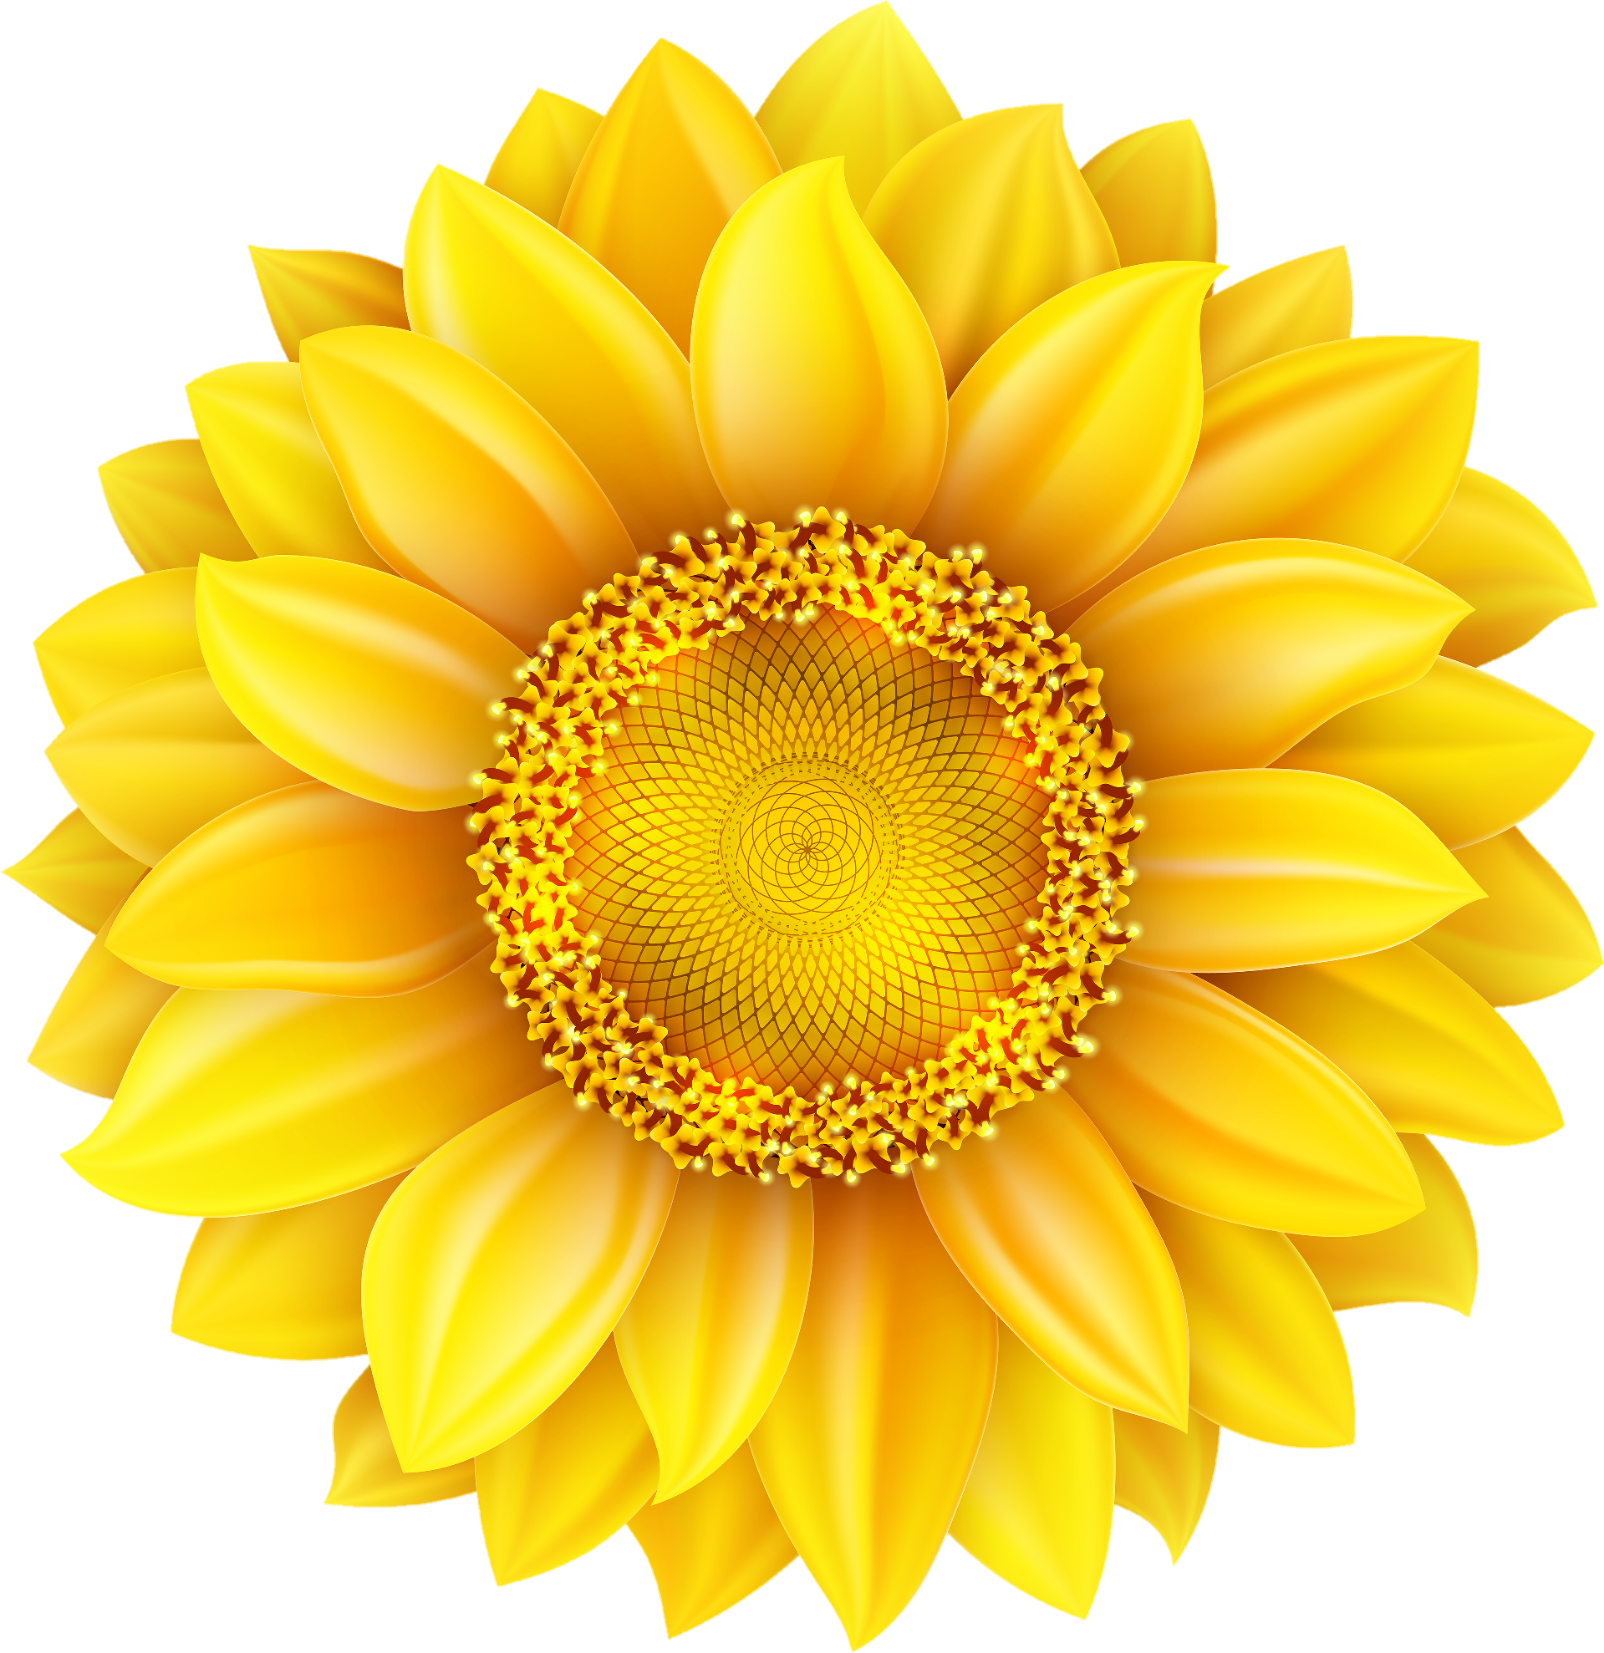 sunflower-png-image-from-pngfre-3